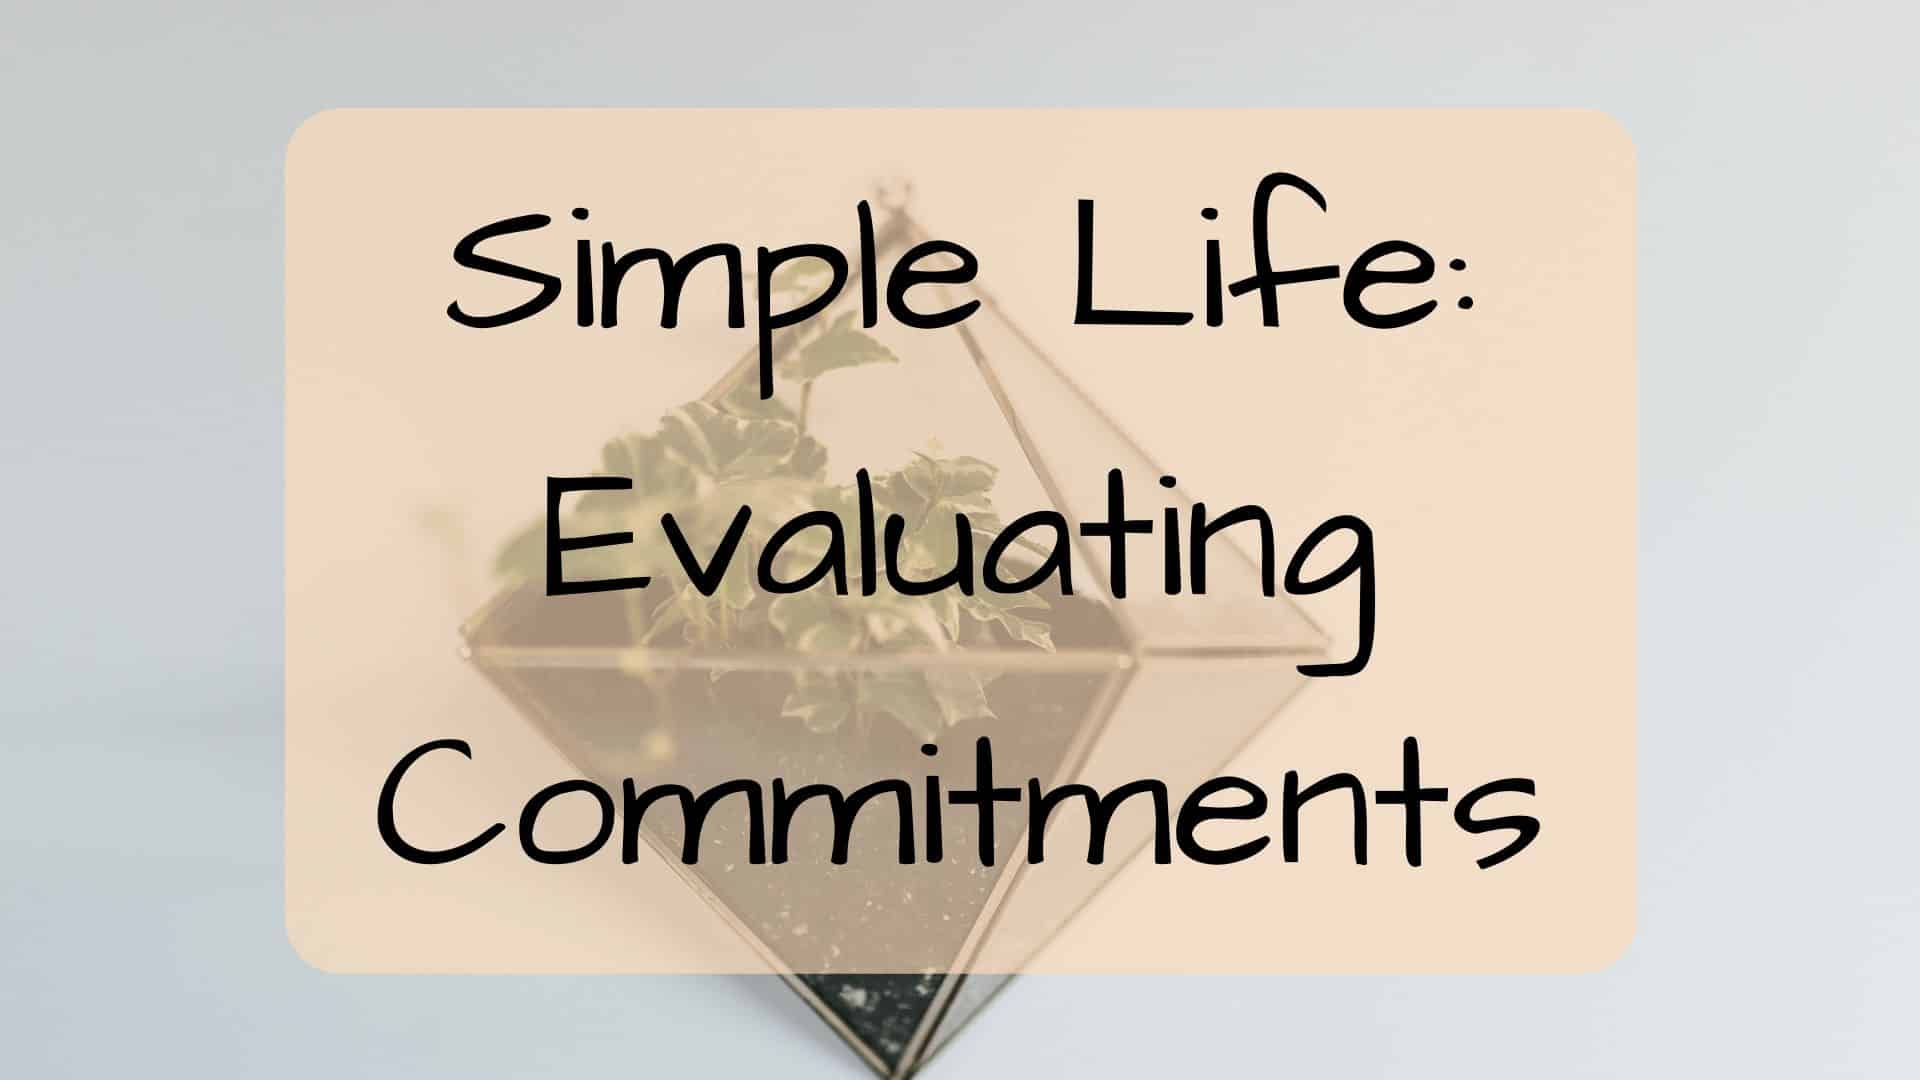 Simple Life: Evaluating Commitments